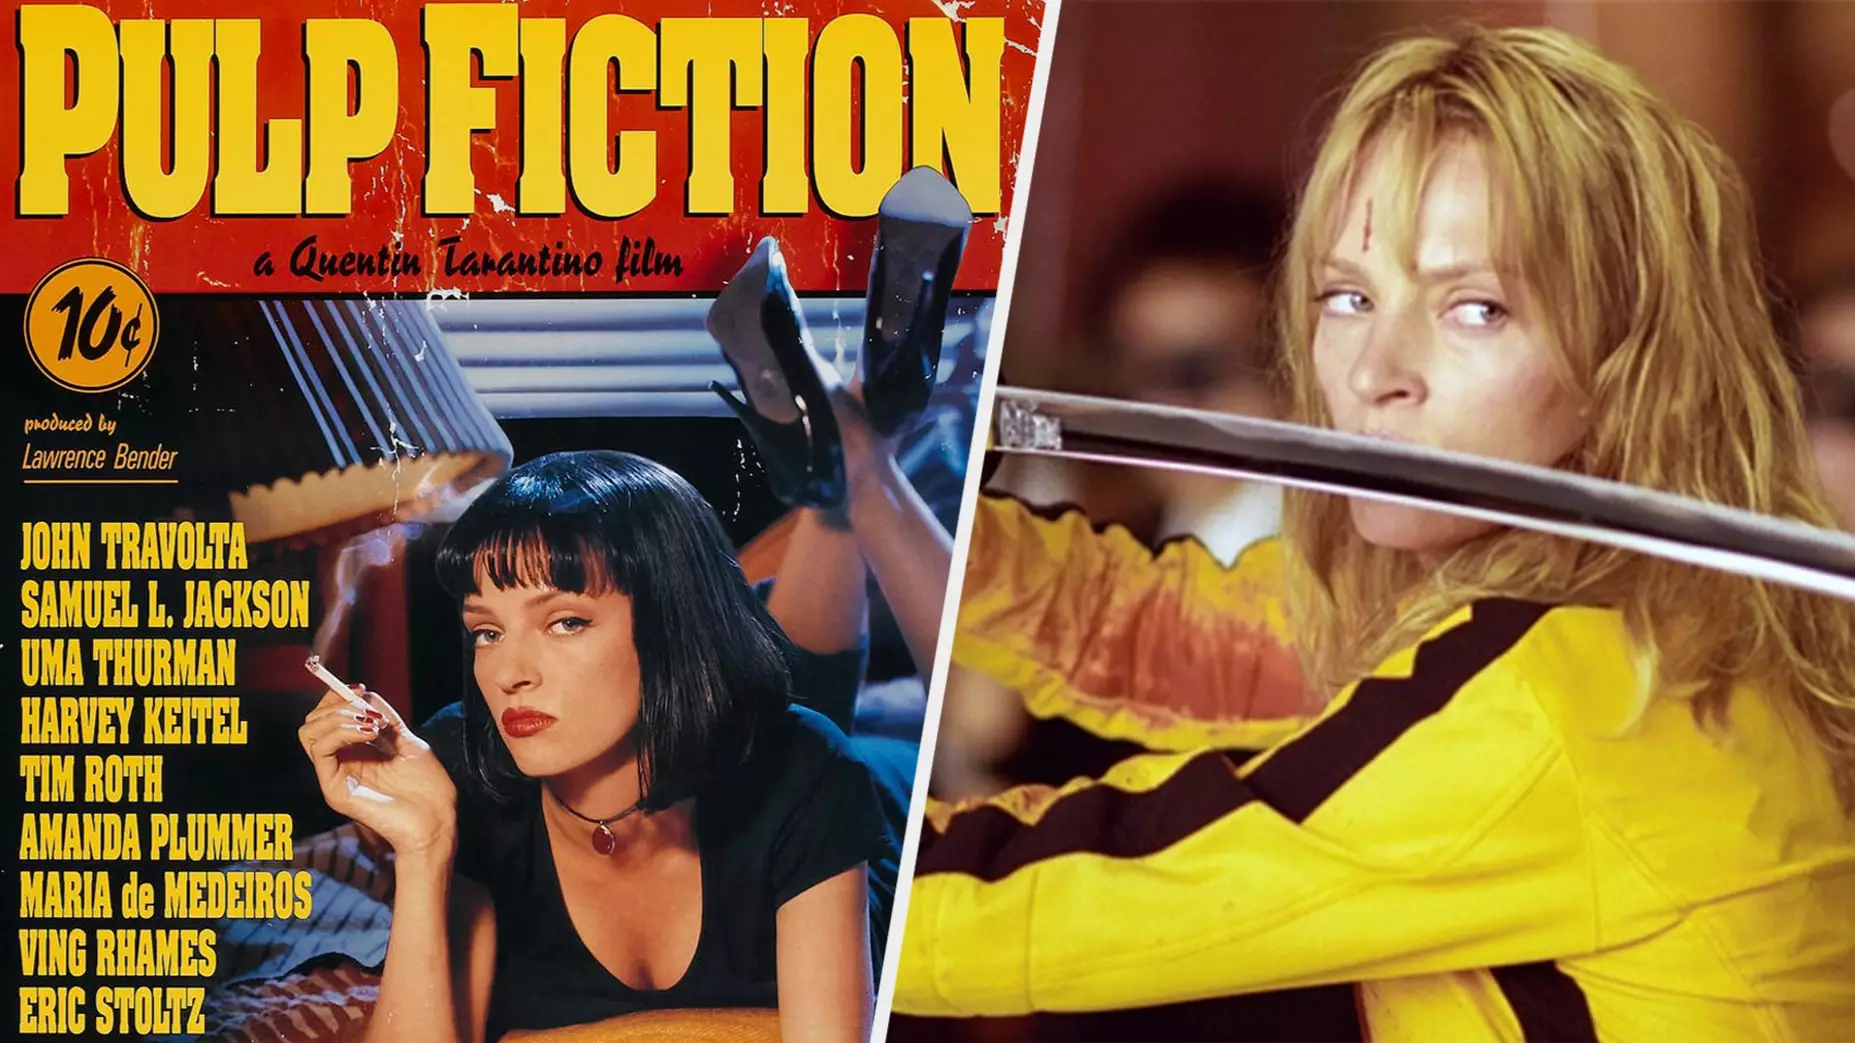 Quentin Tarantino Says His Next Movie Is His Last, For Real This Time